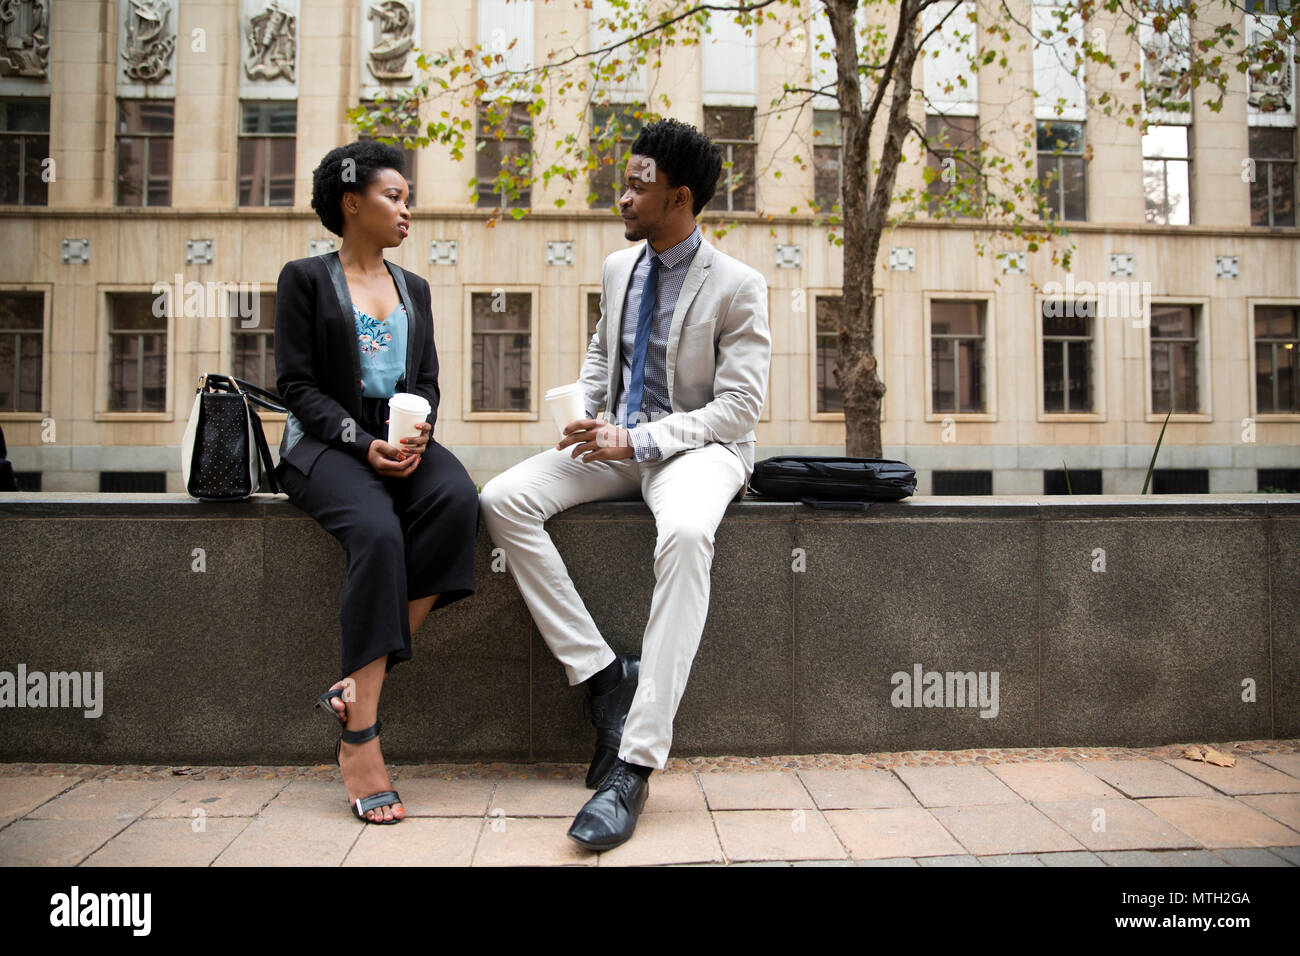 Business man and woman having coffee Stock Photo